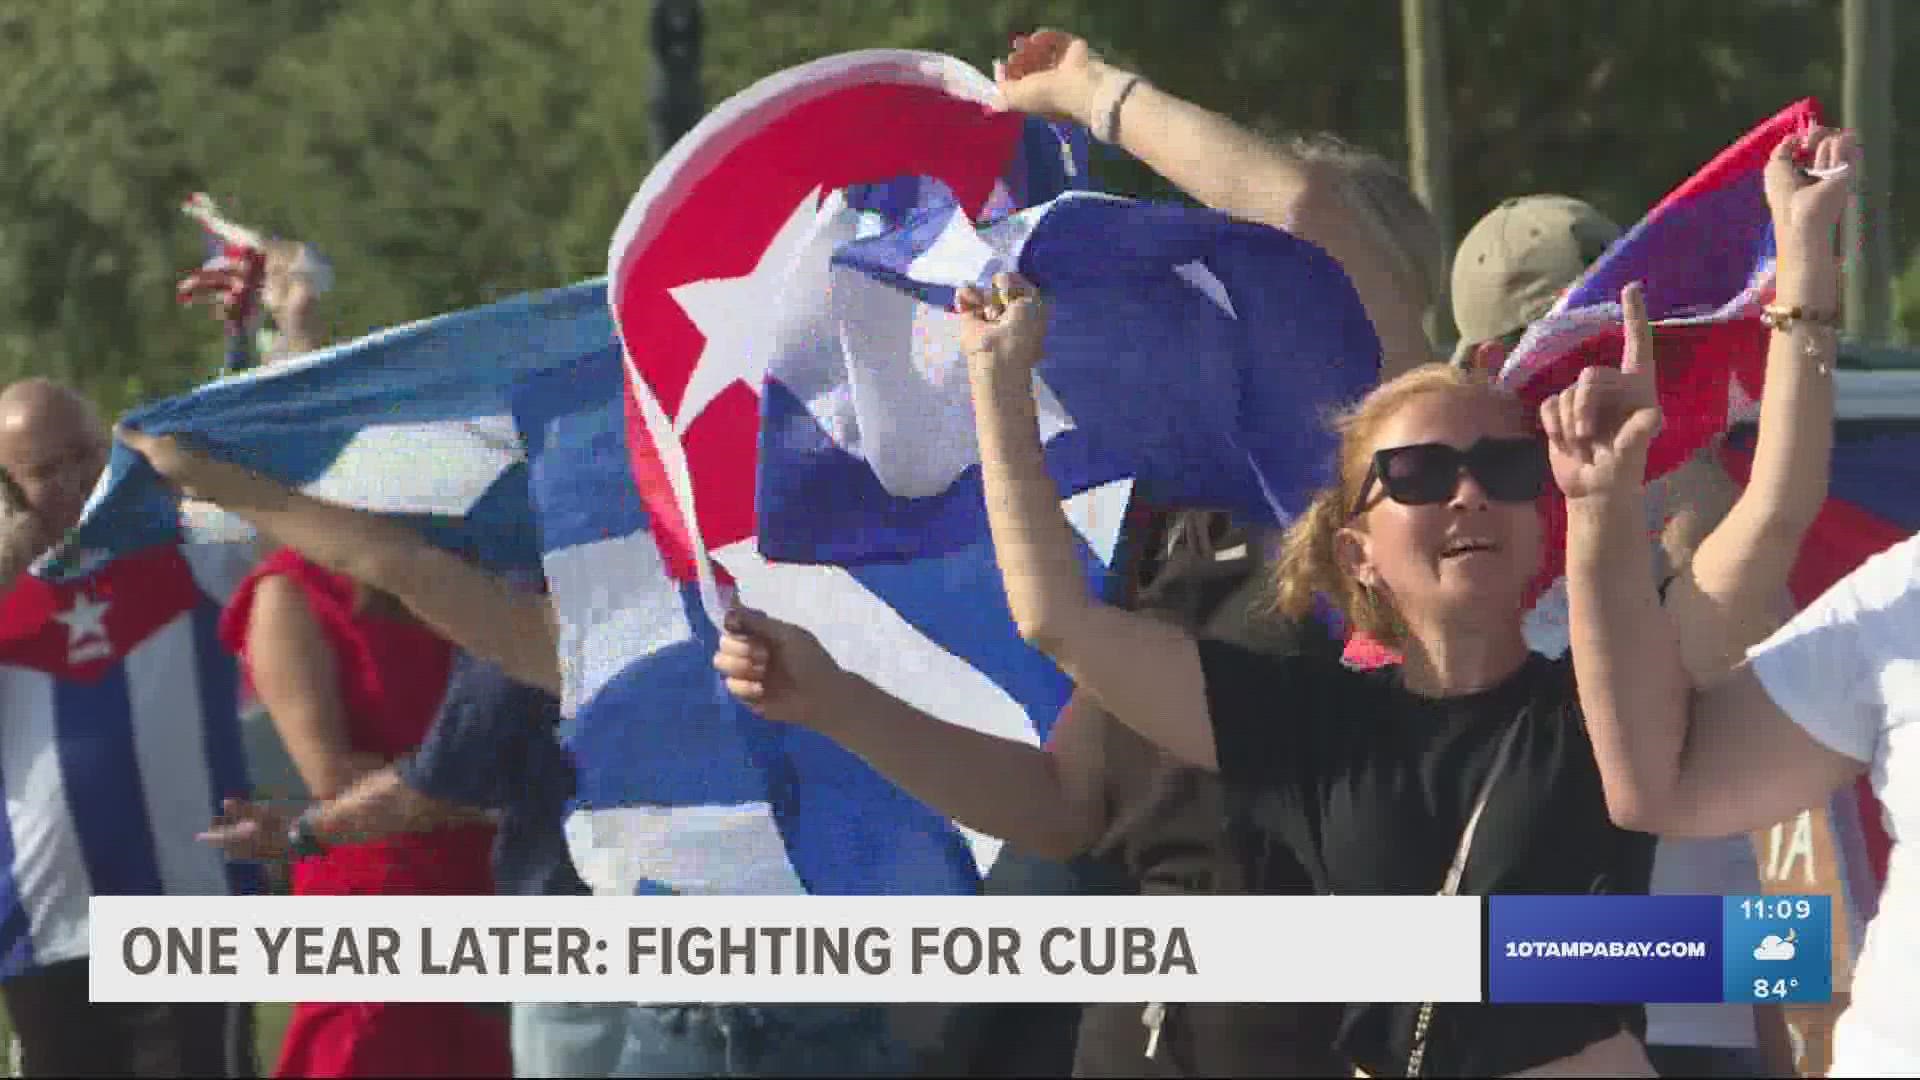 One year ago, the worldwide protests broke out in an attempt to fight against the Cuban regime run by President Miguel Diaz Canel.